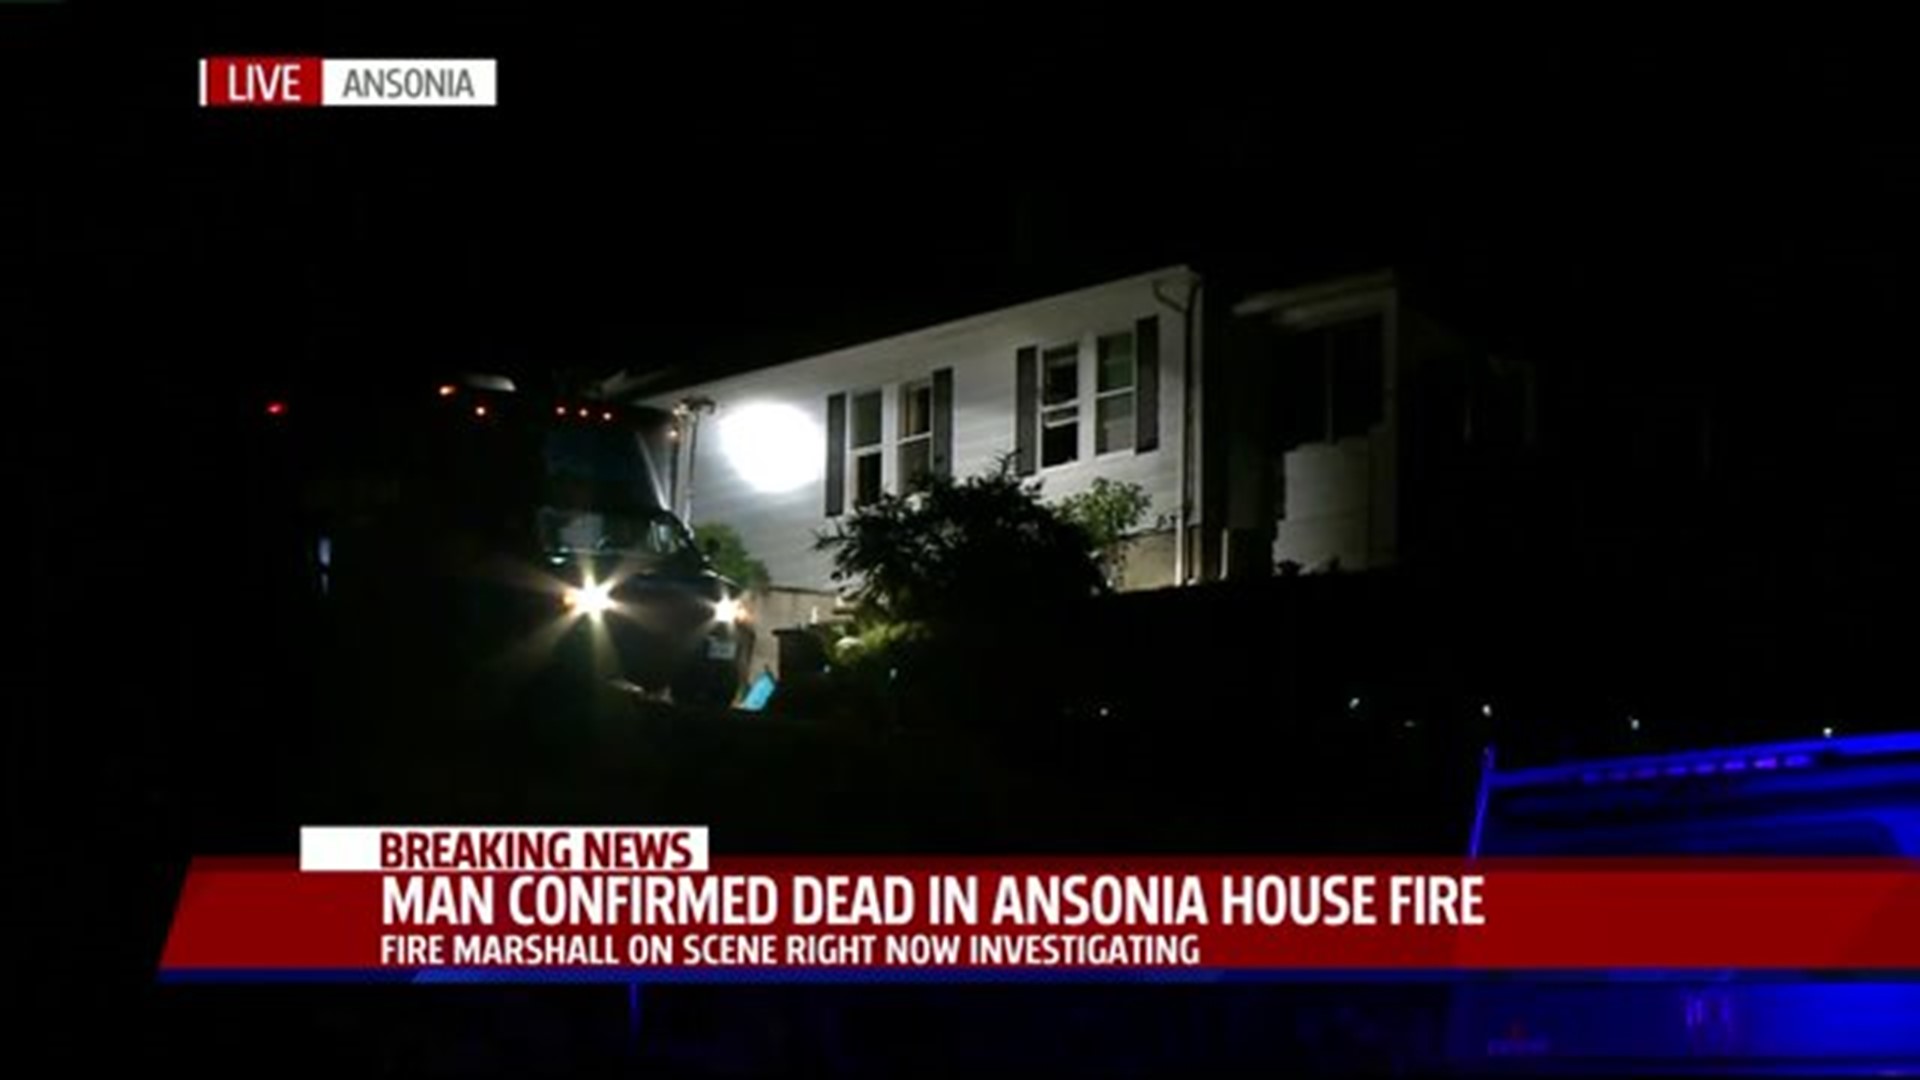 Man found dead after house fire in Ansonia